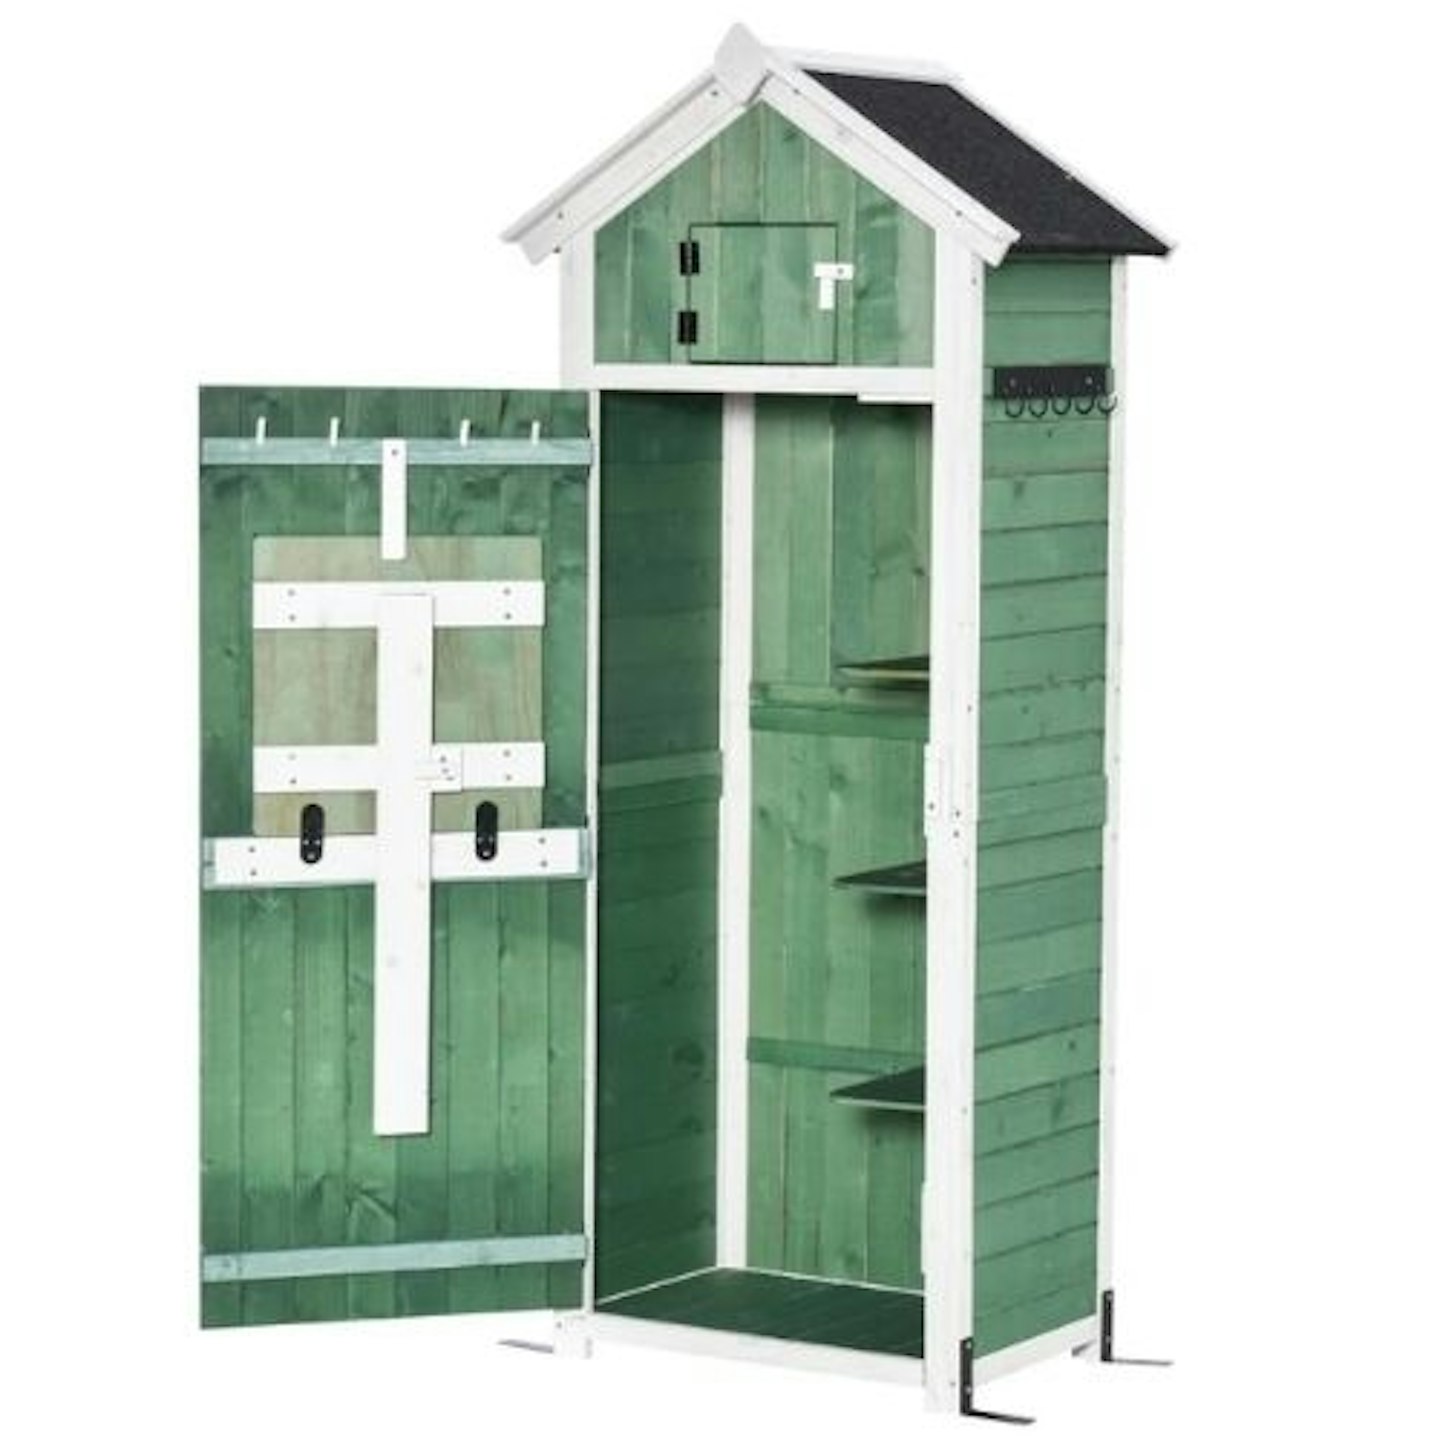 Outsunny Garden Wood Storage Shed with Workstation